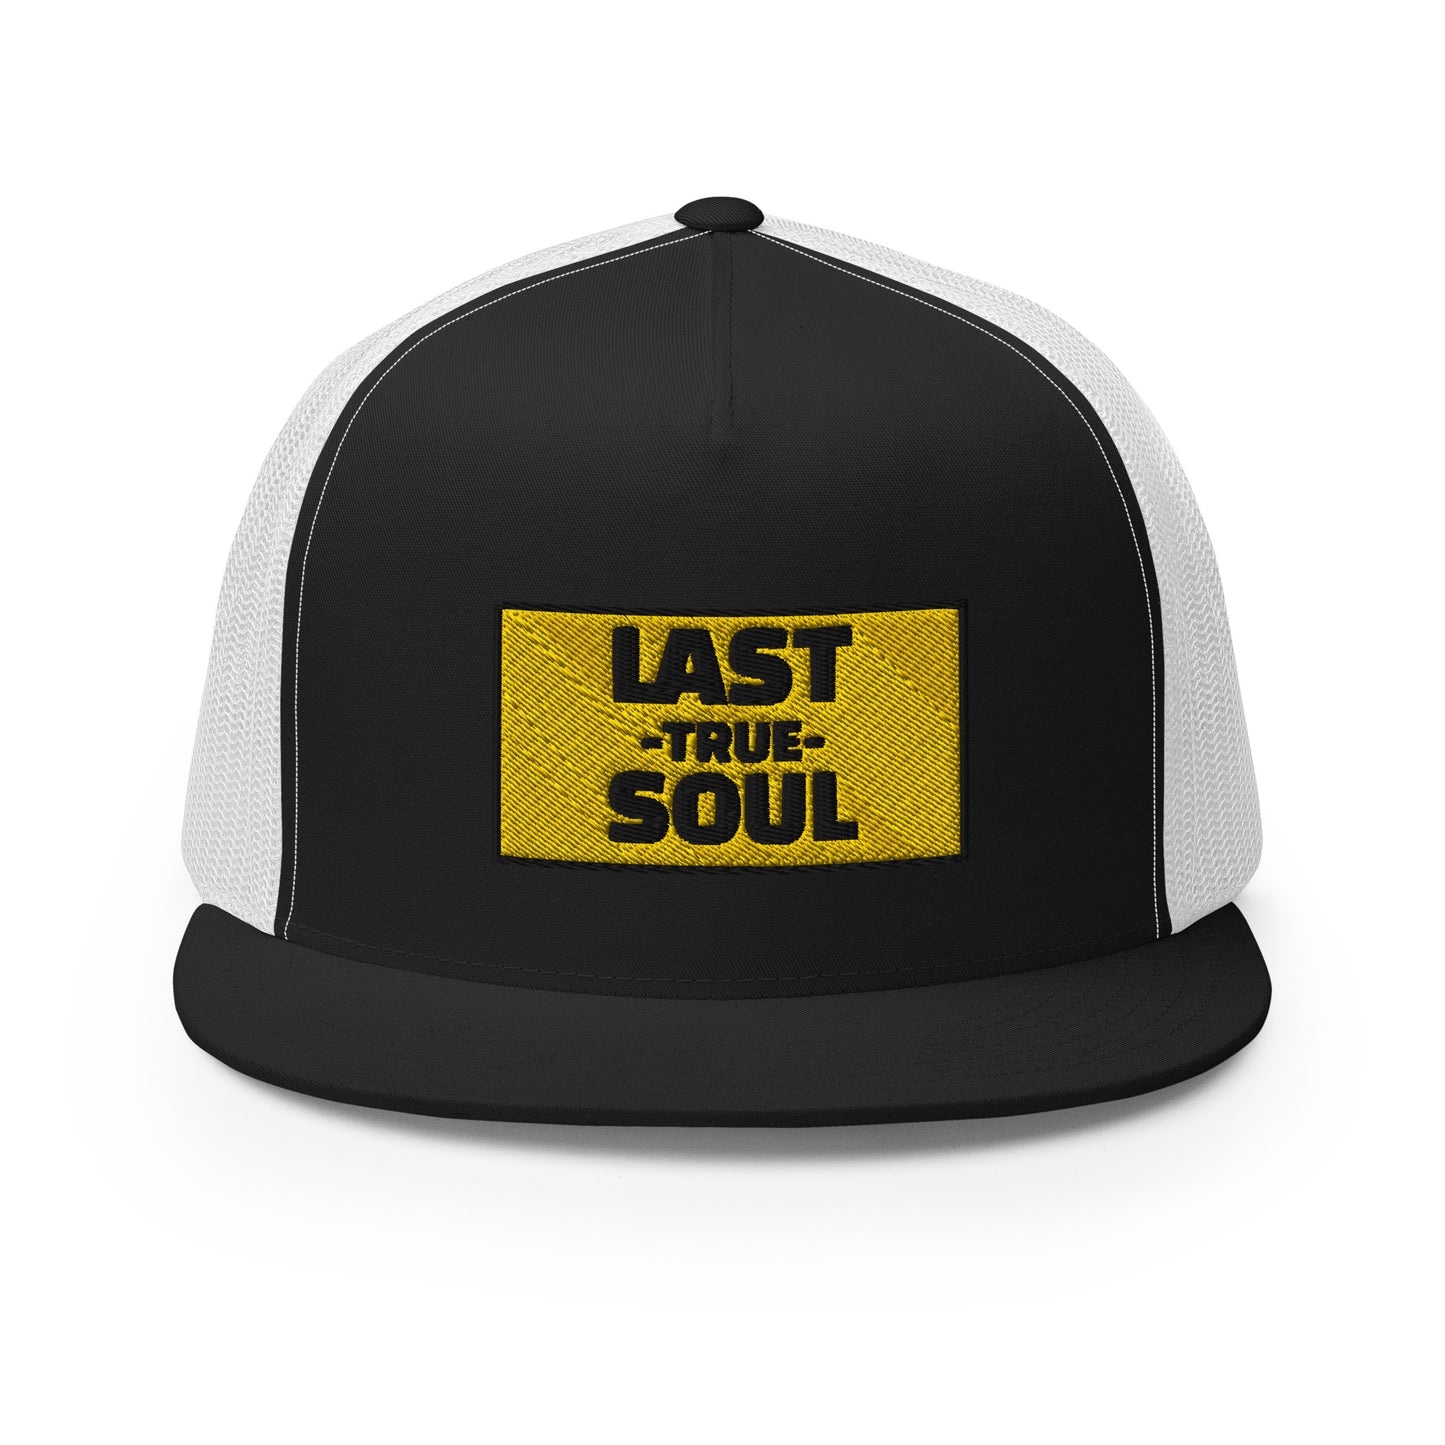 Embroidered Nametag Trucker Cap by LastTrueSouL